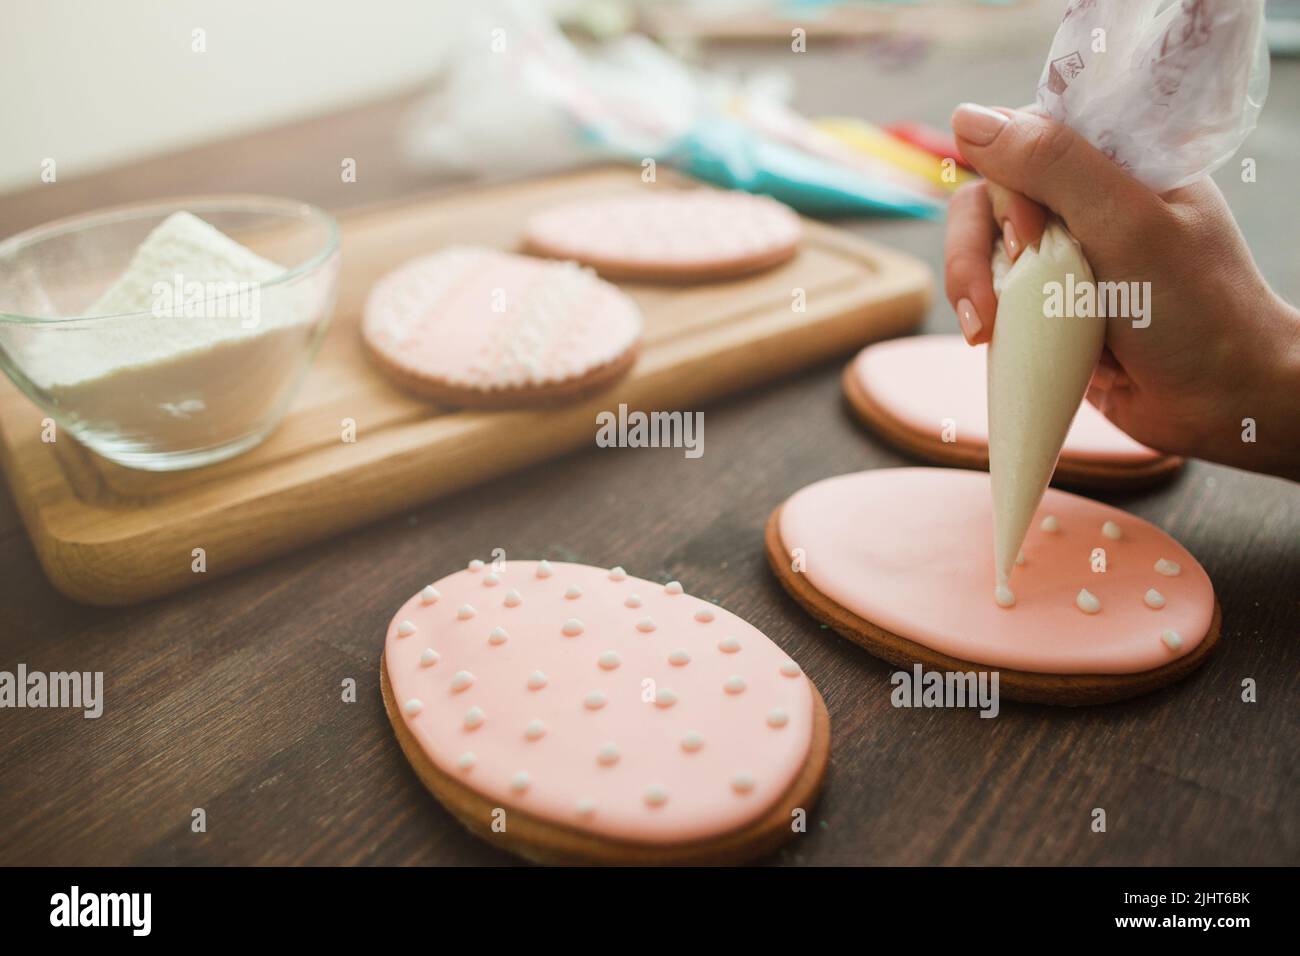 Homemade sweets and desserts. Cookery art. Stock Photo